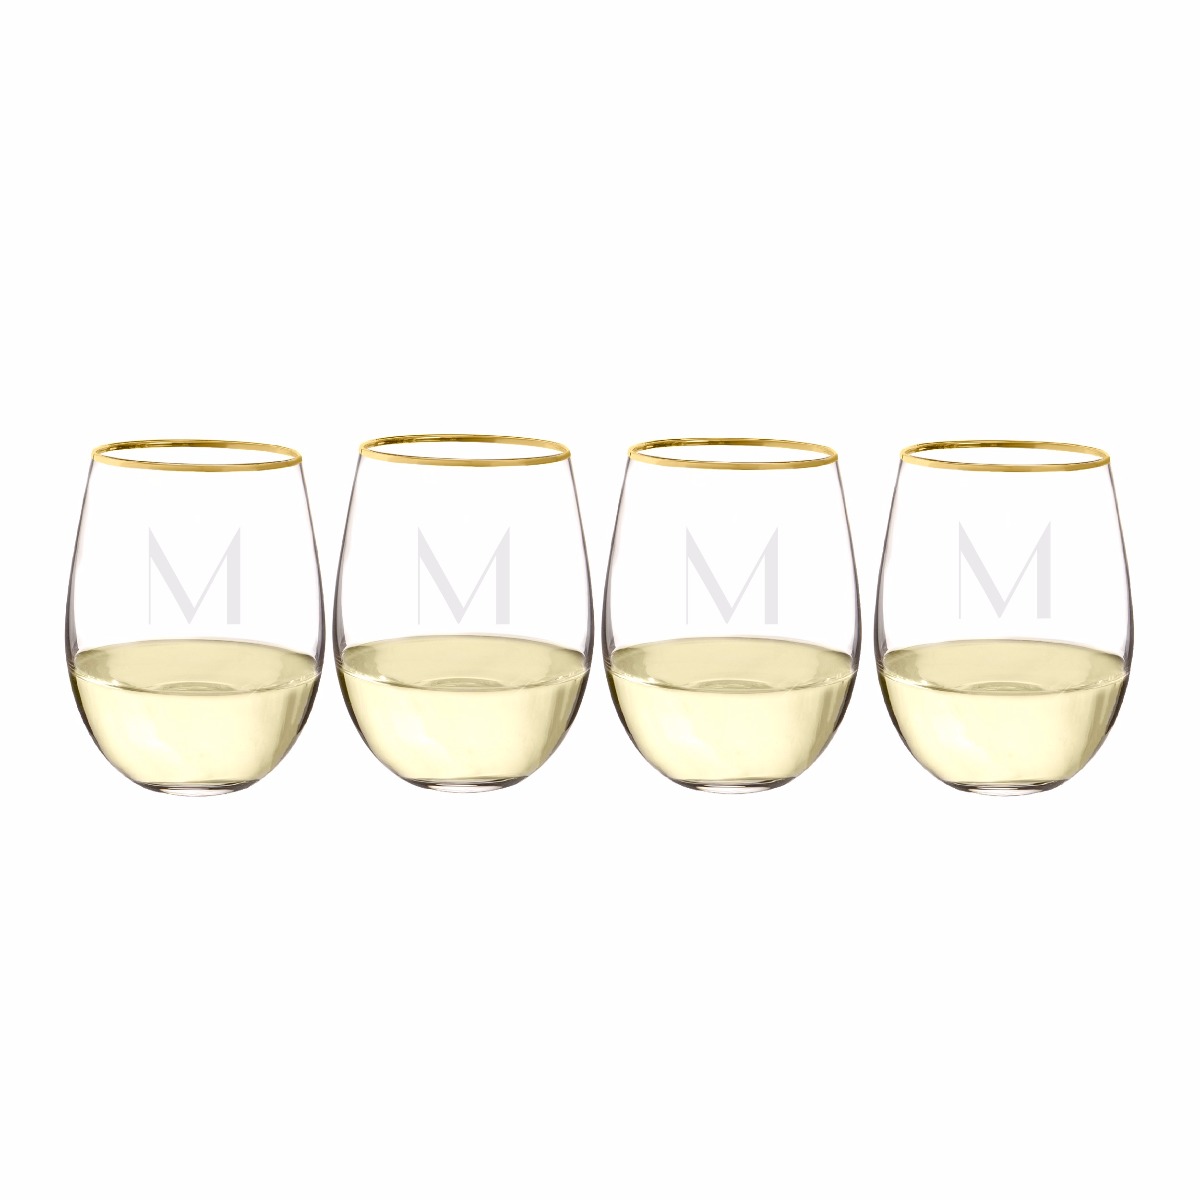 Personalized Gold Rim Stemless Wine Glasses (set of 4)